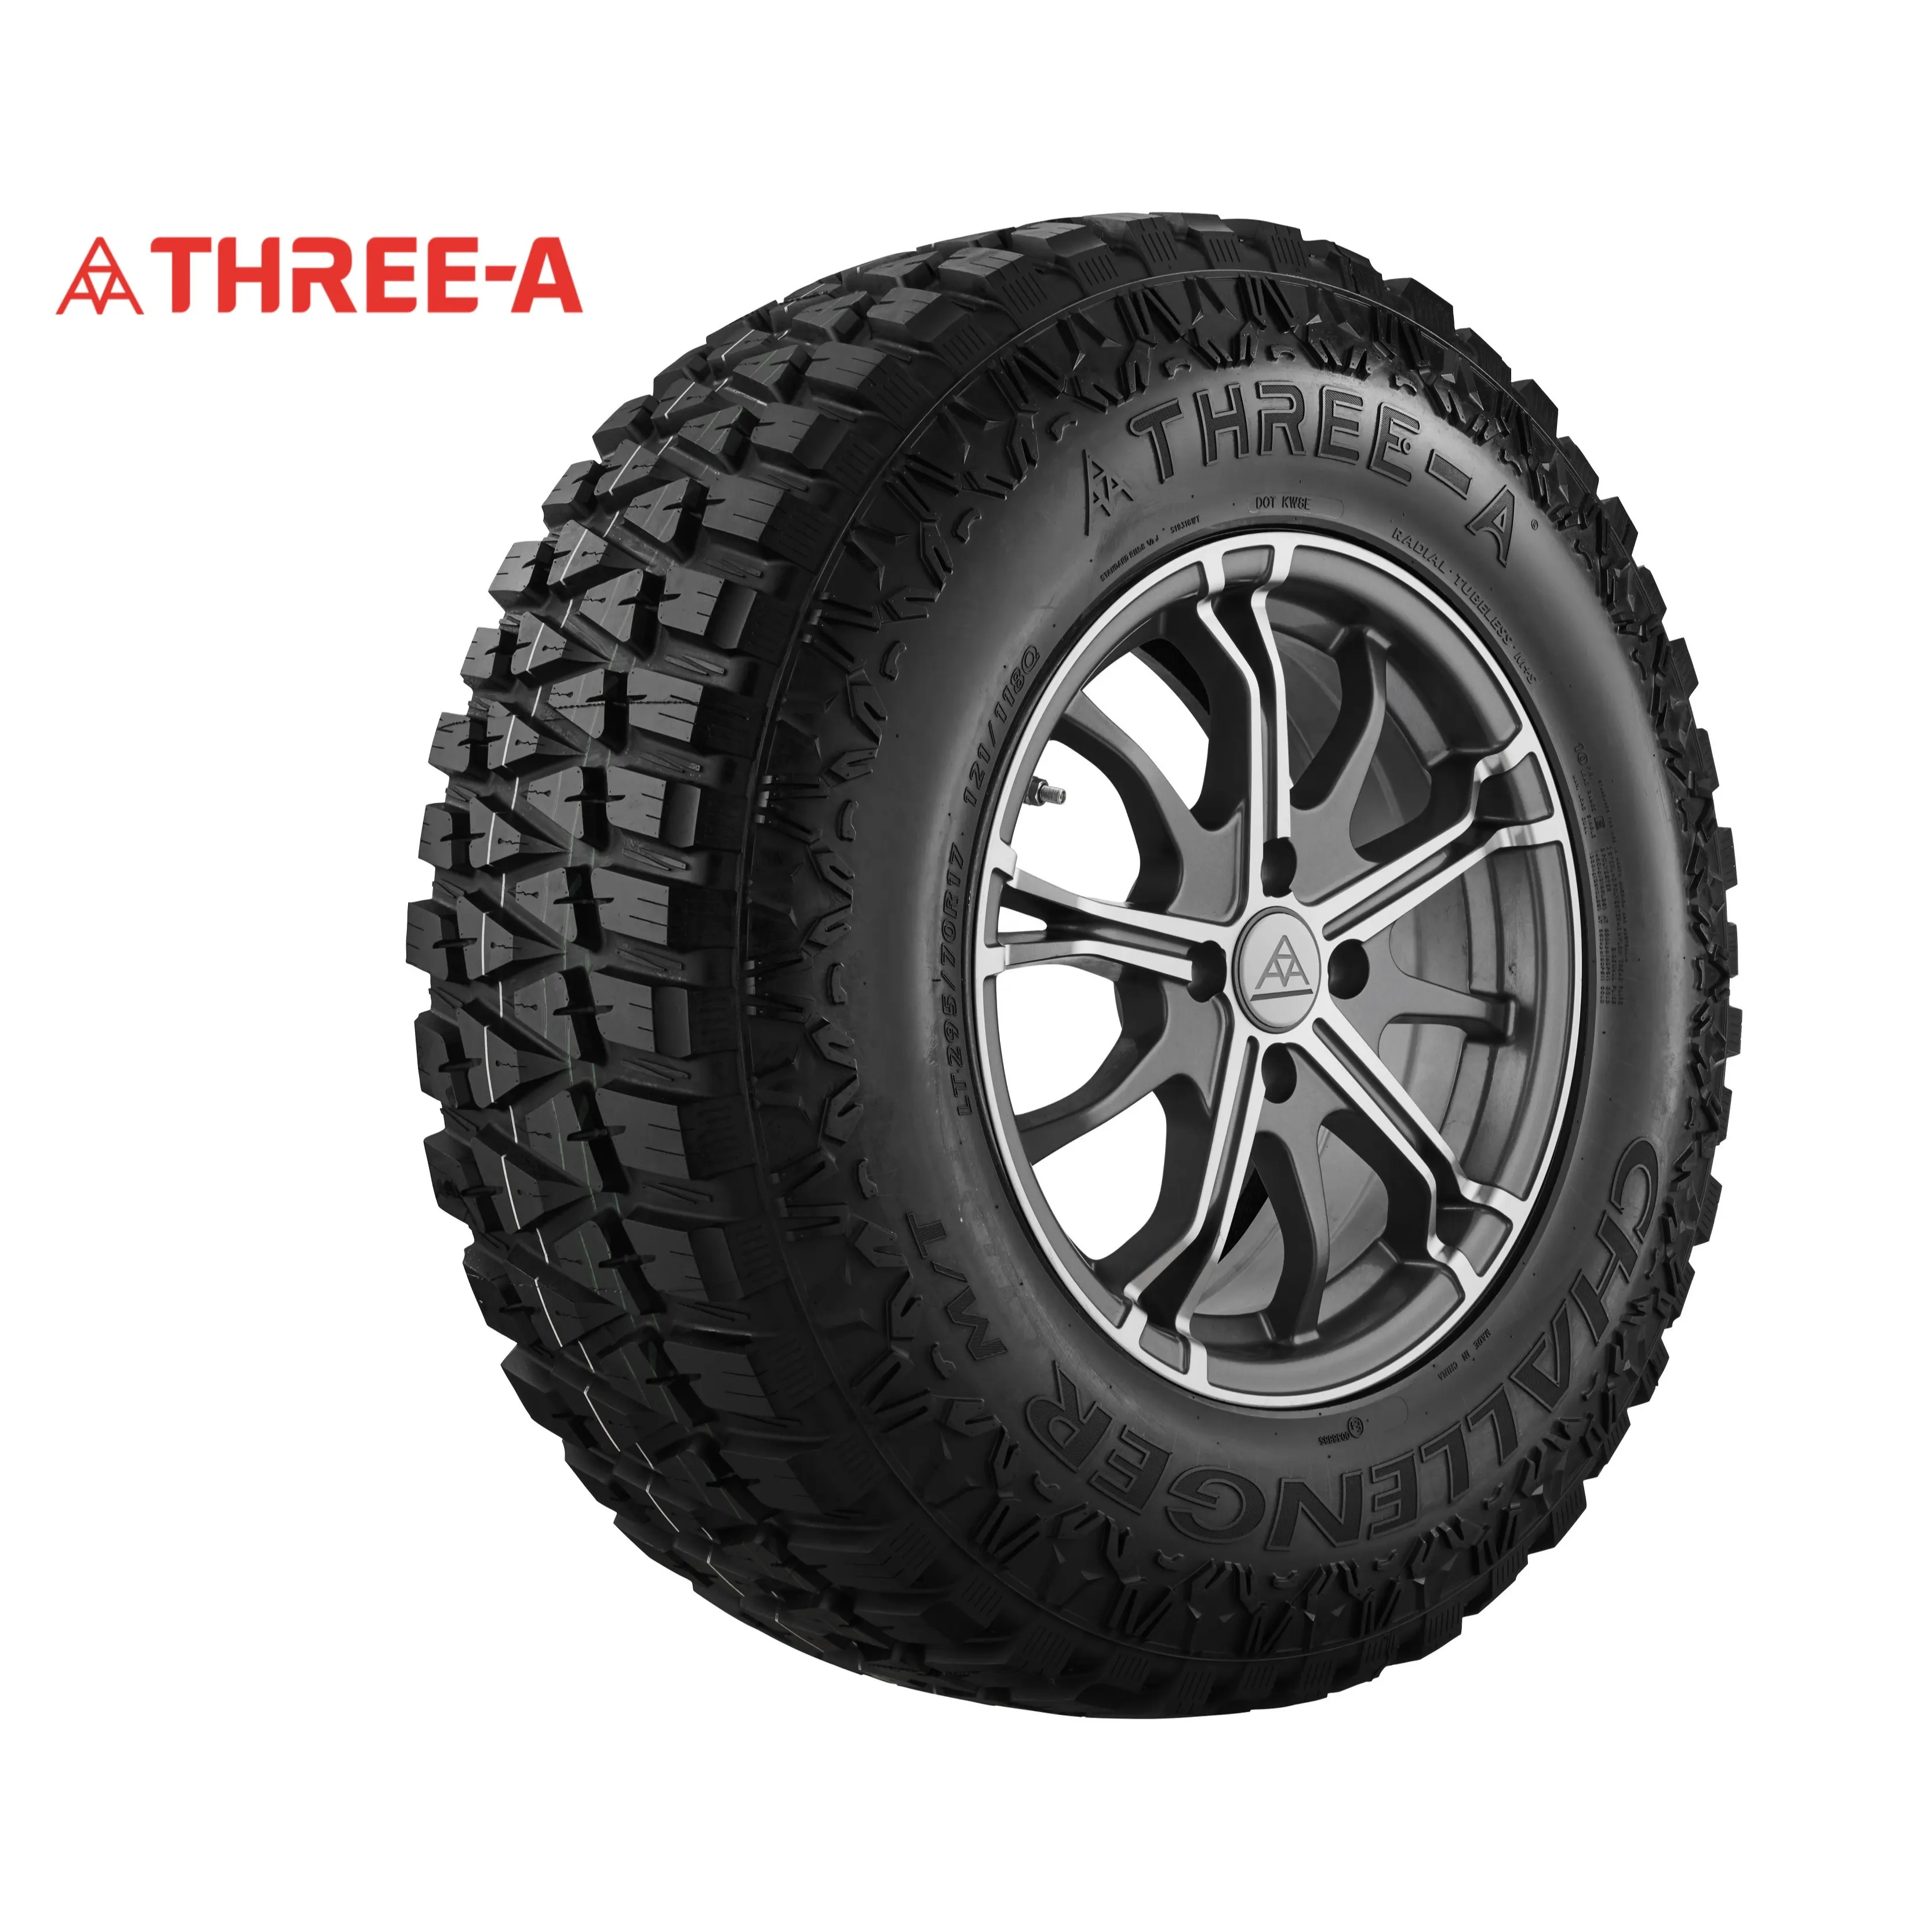 Chinese cheap pcr tyres for car 13-17 inch tires